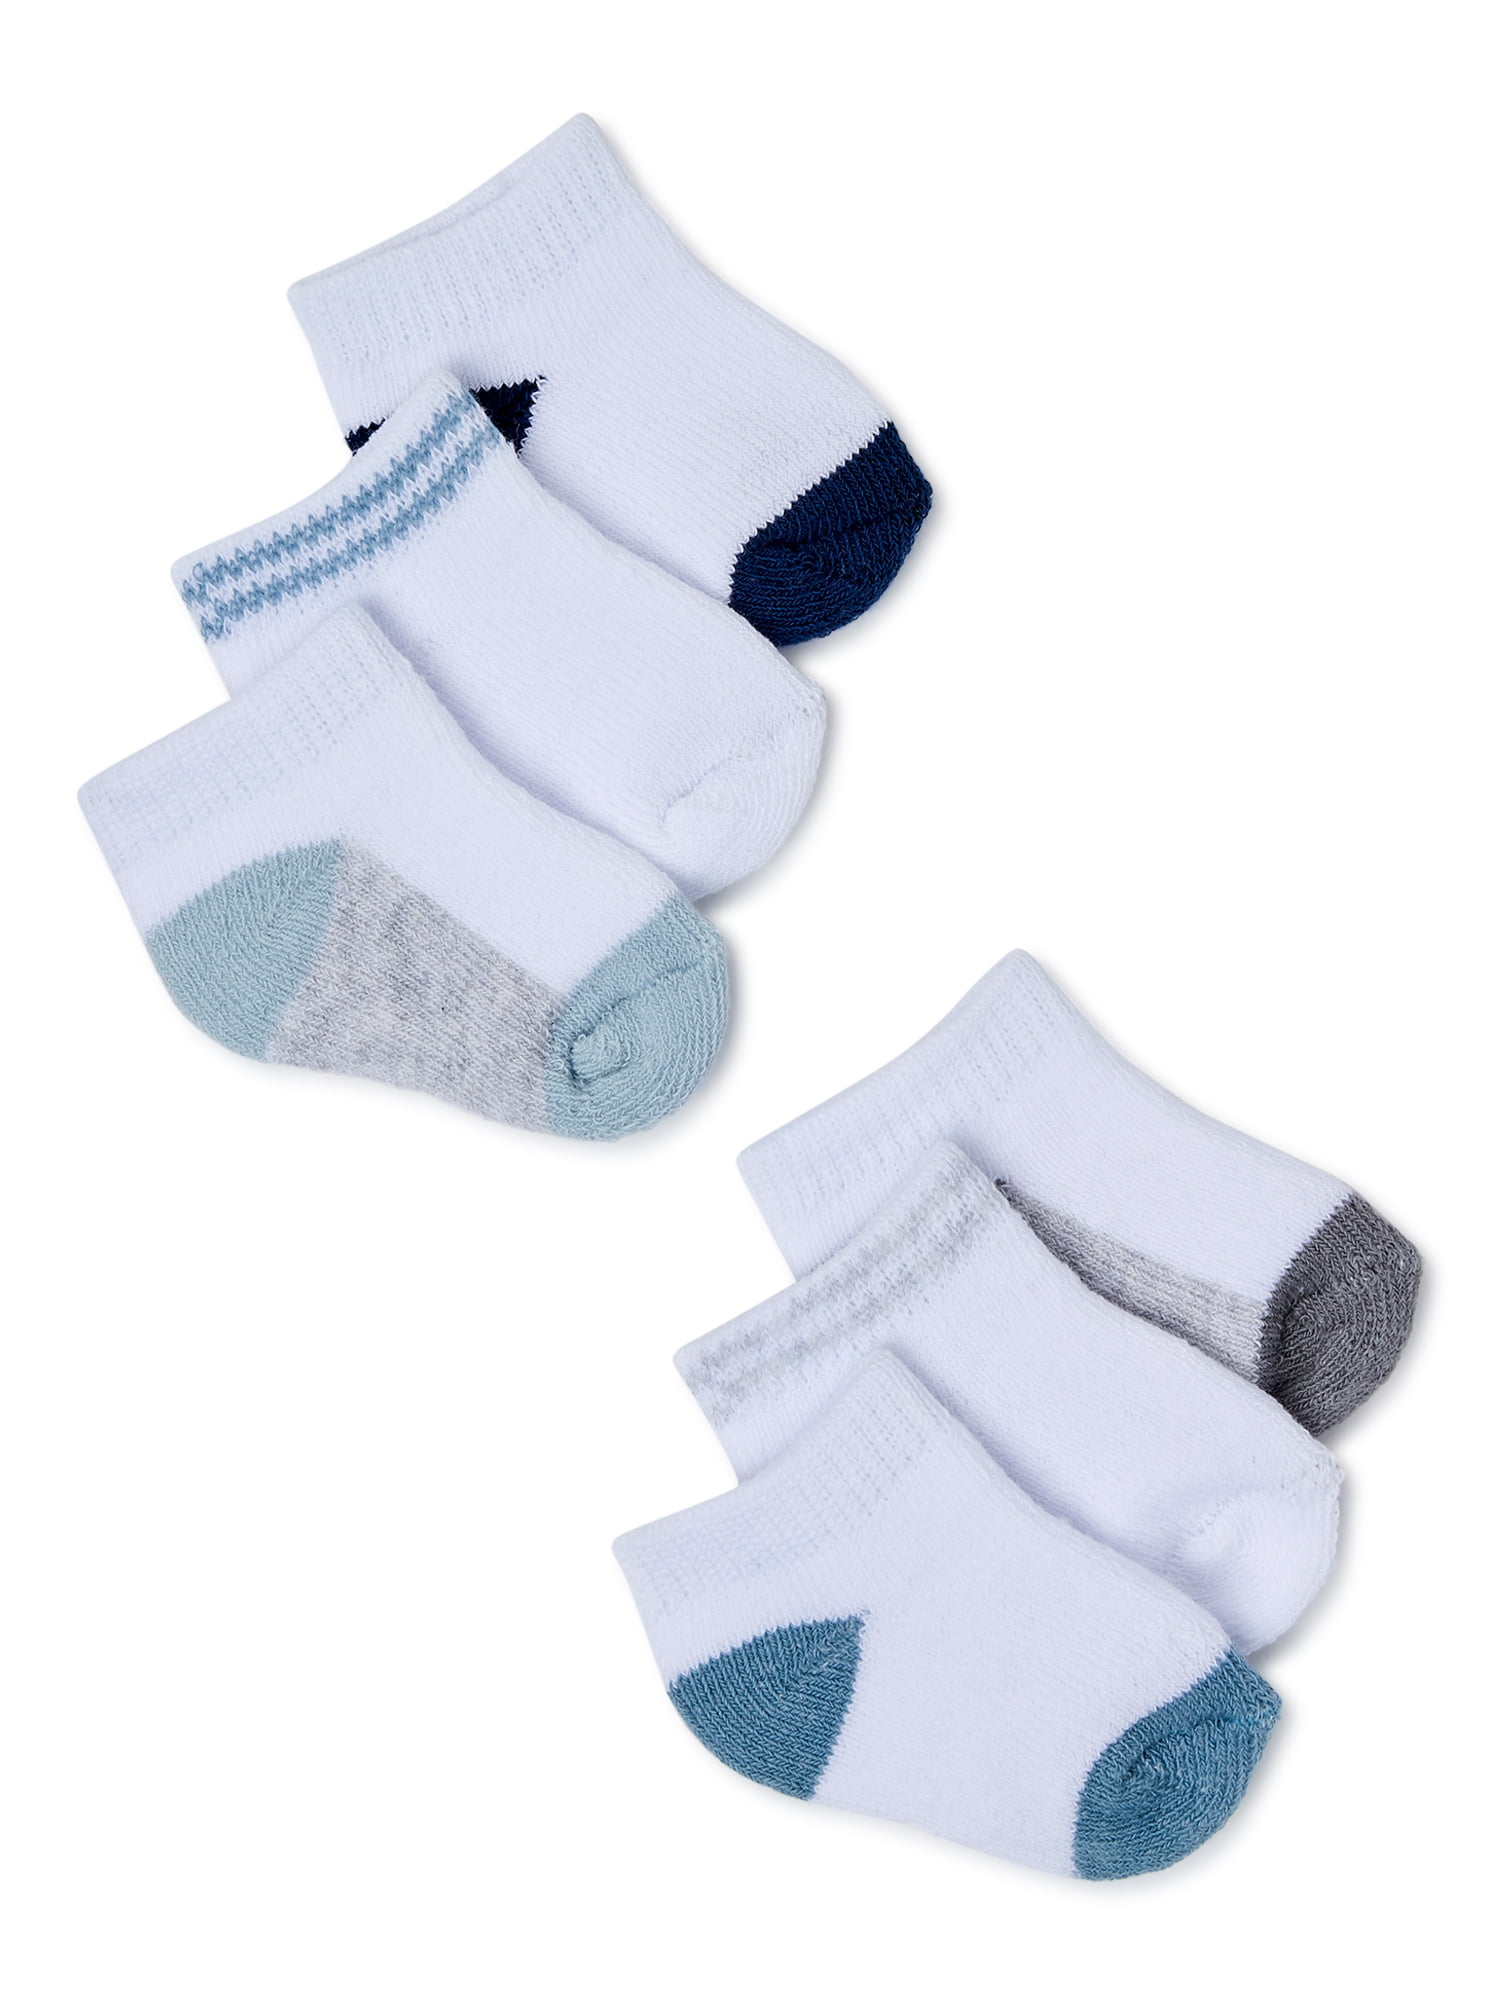 Carter's Child of Mine Baby Boys' Low-Cut Terry Cloth Socks, 6-Pack ...